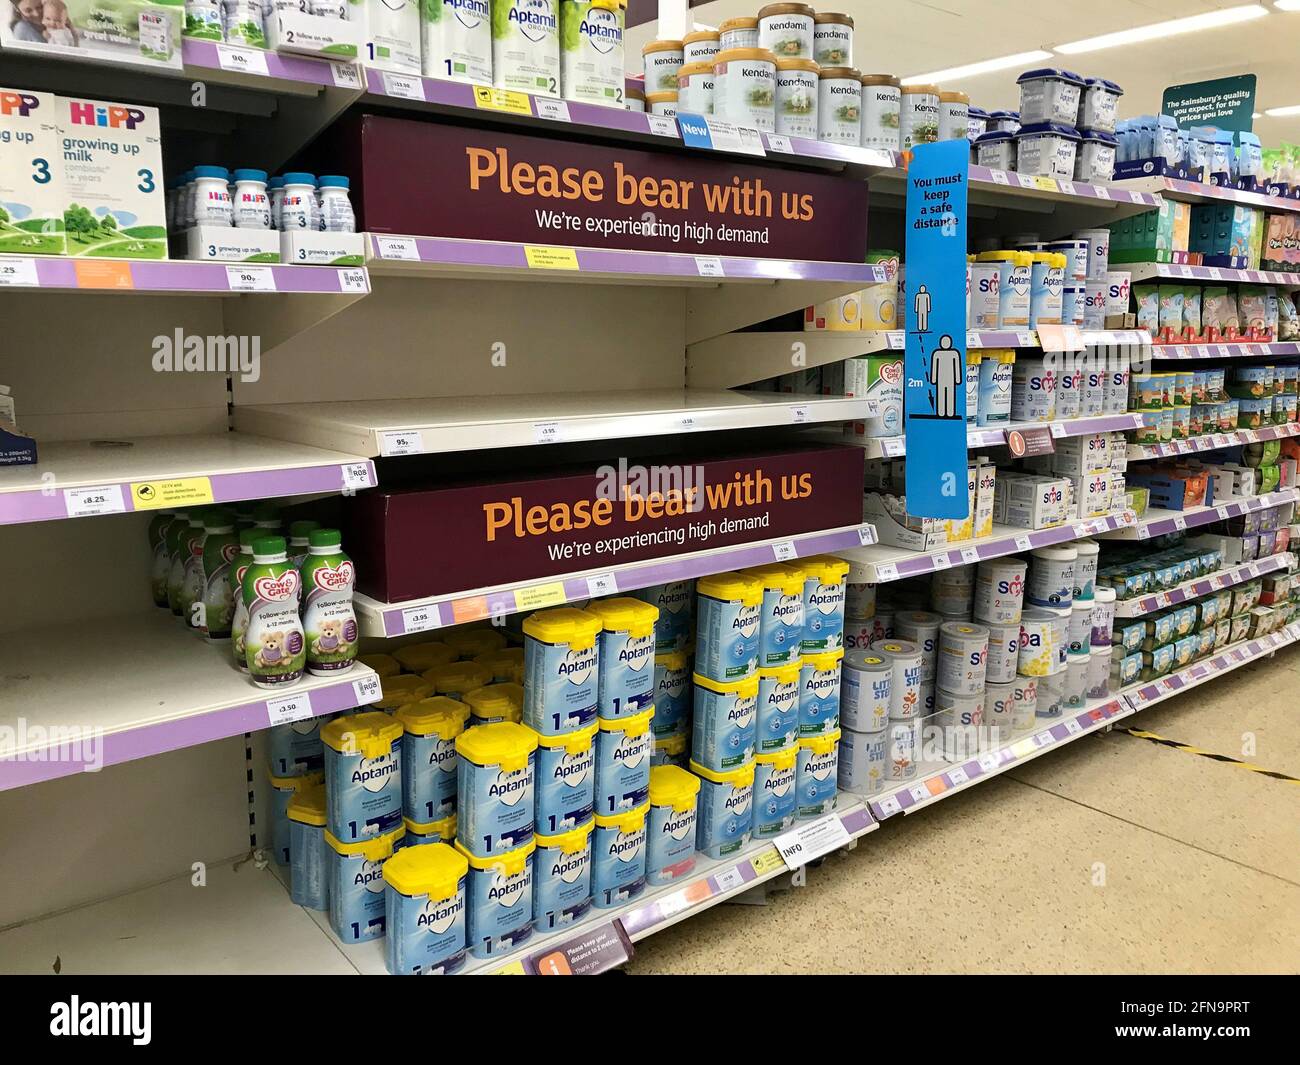 Southend, Essex, UK - 14th may 2021: Parents of young children are faced with empty shelves after a shortage of ingredients for popular brands of baby. Stock Photo